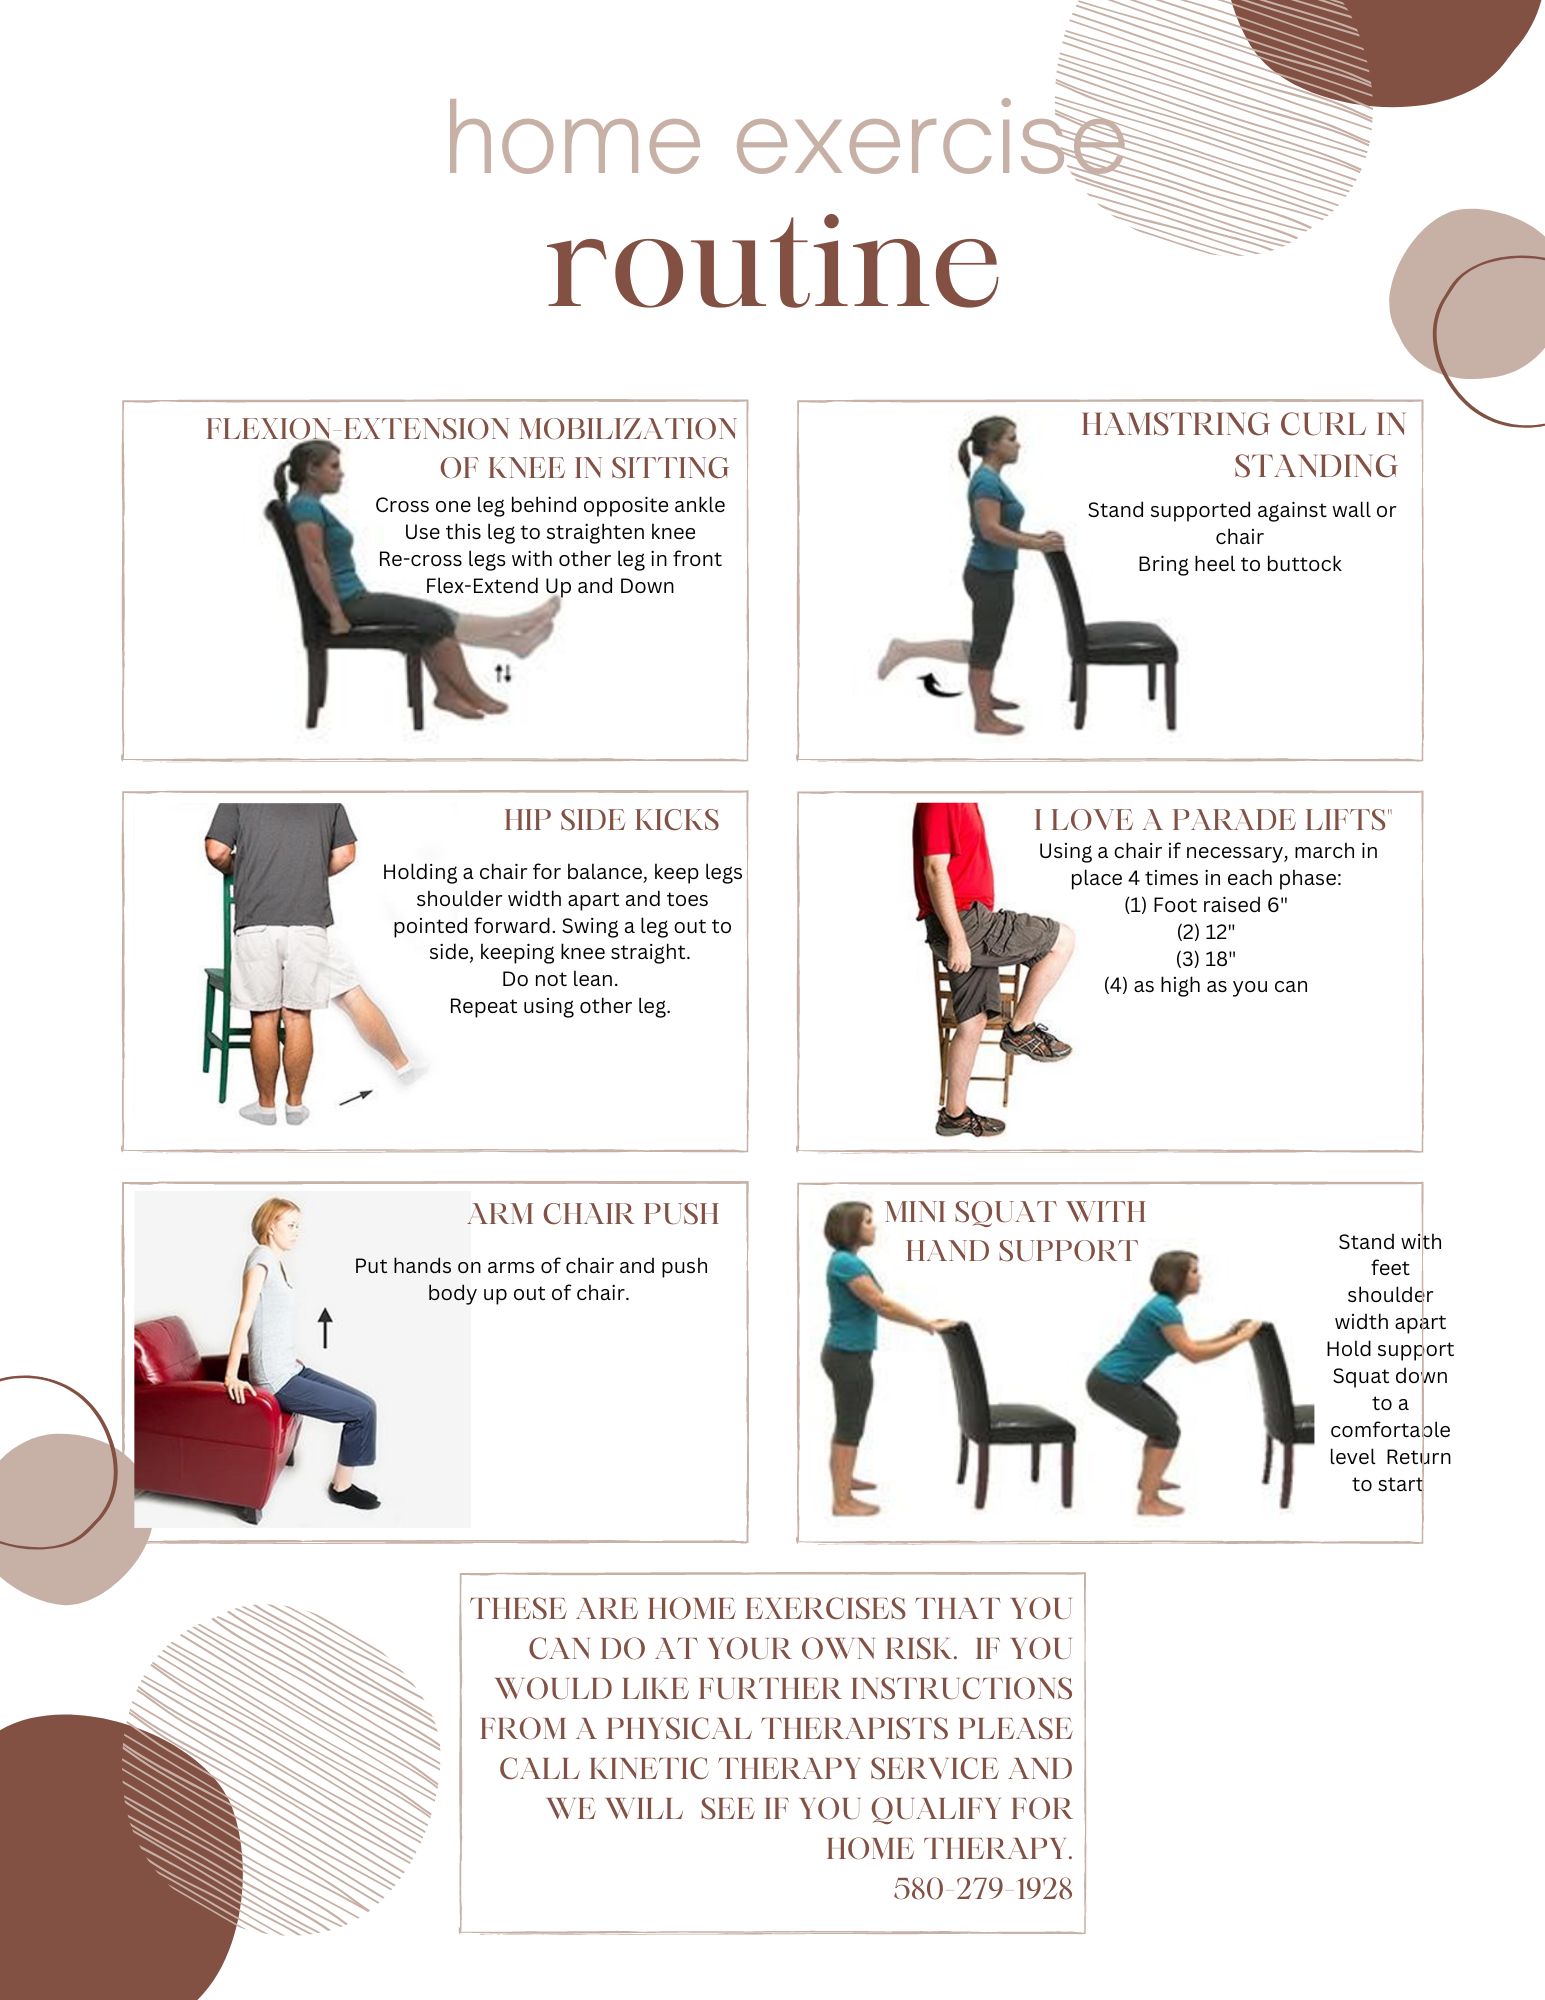 Here is a sample home exercise routine